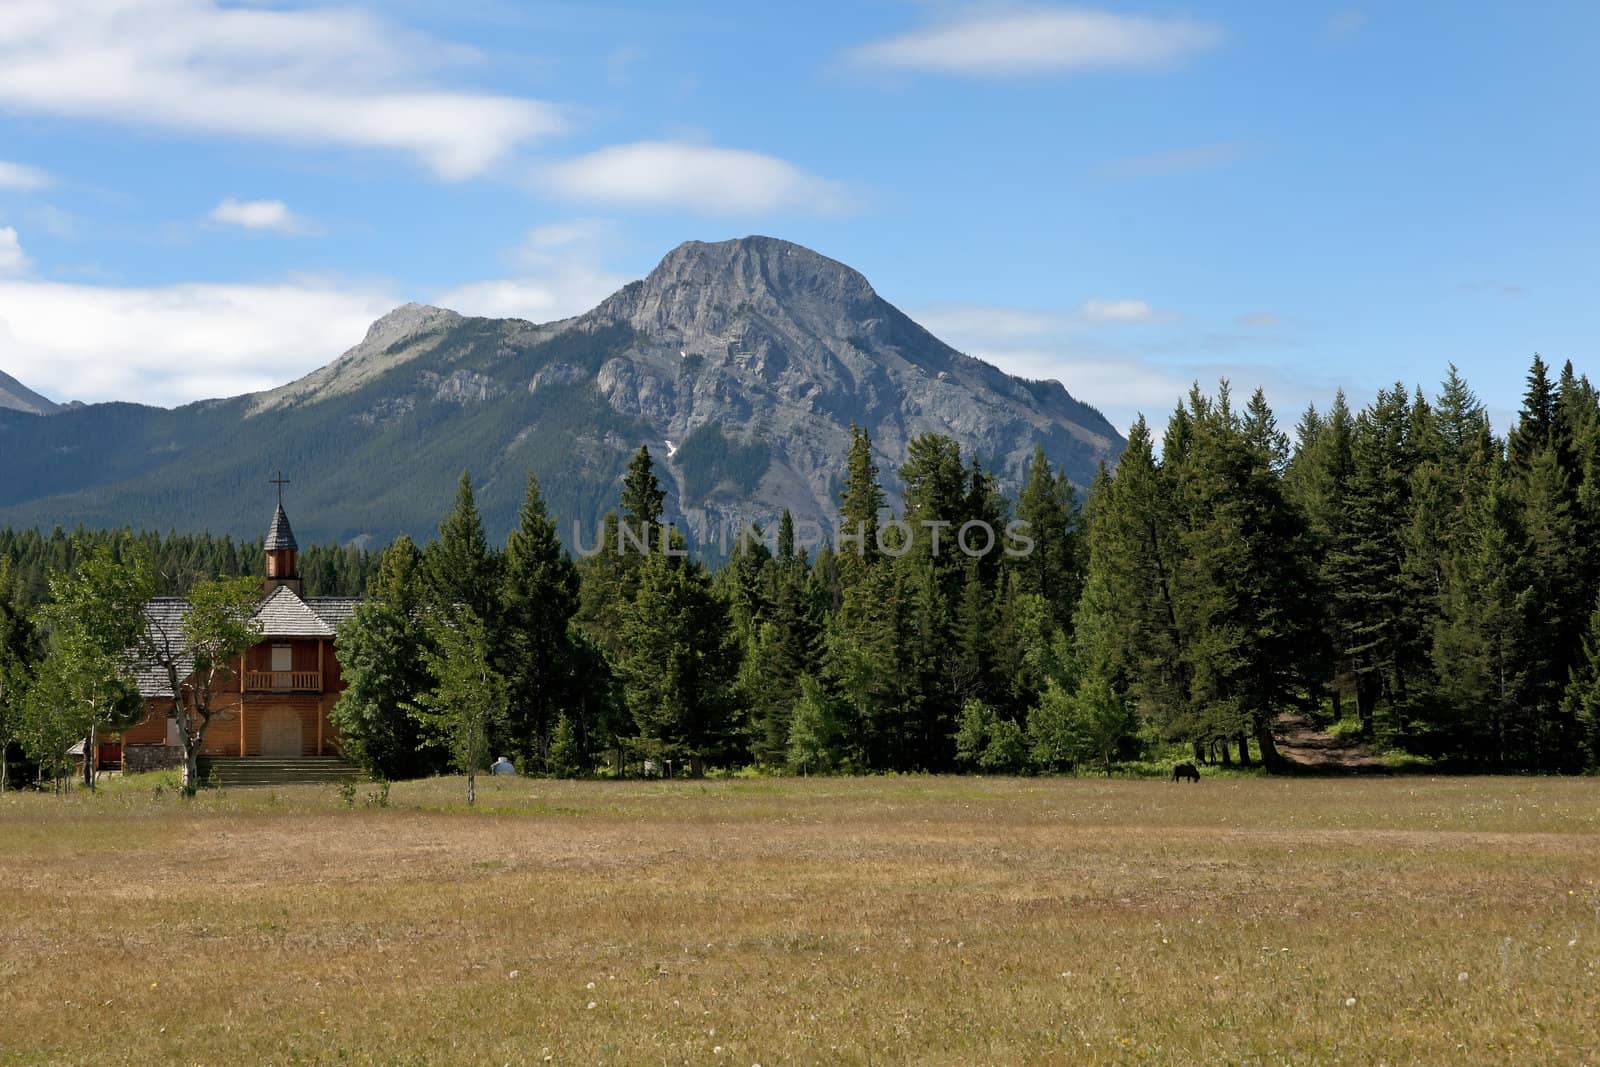 Little red wood church across a plain against forest, rocky moun by Claudine